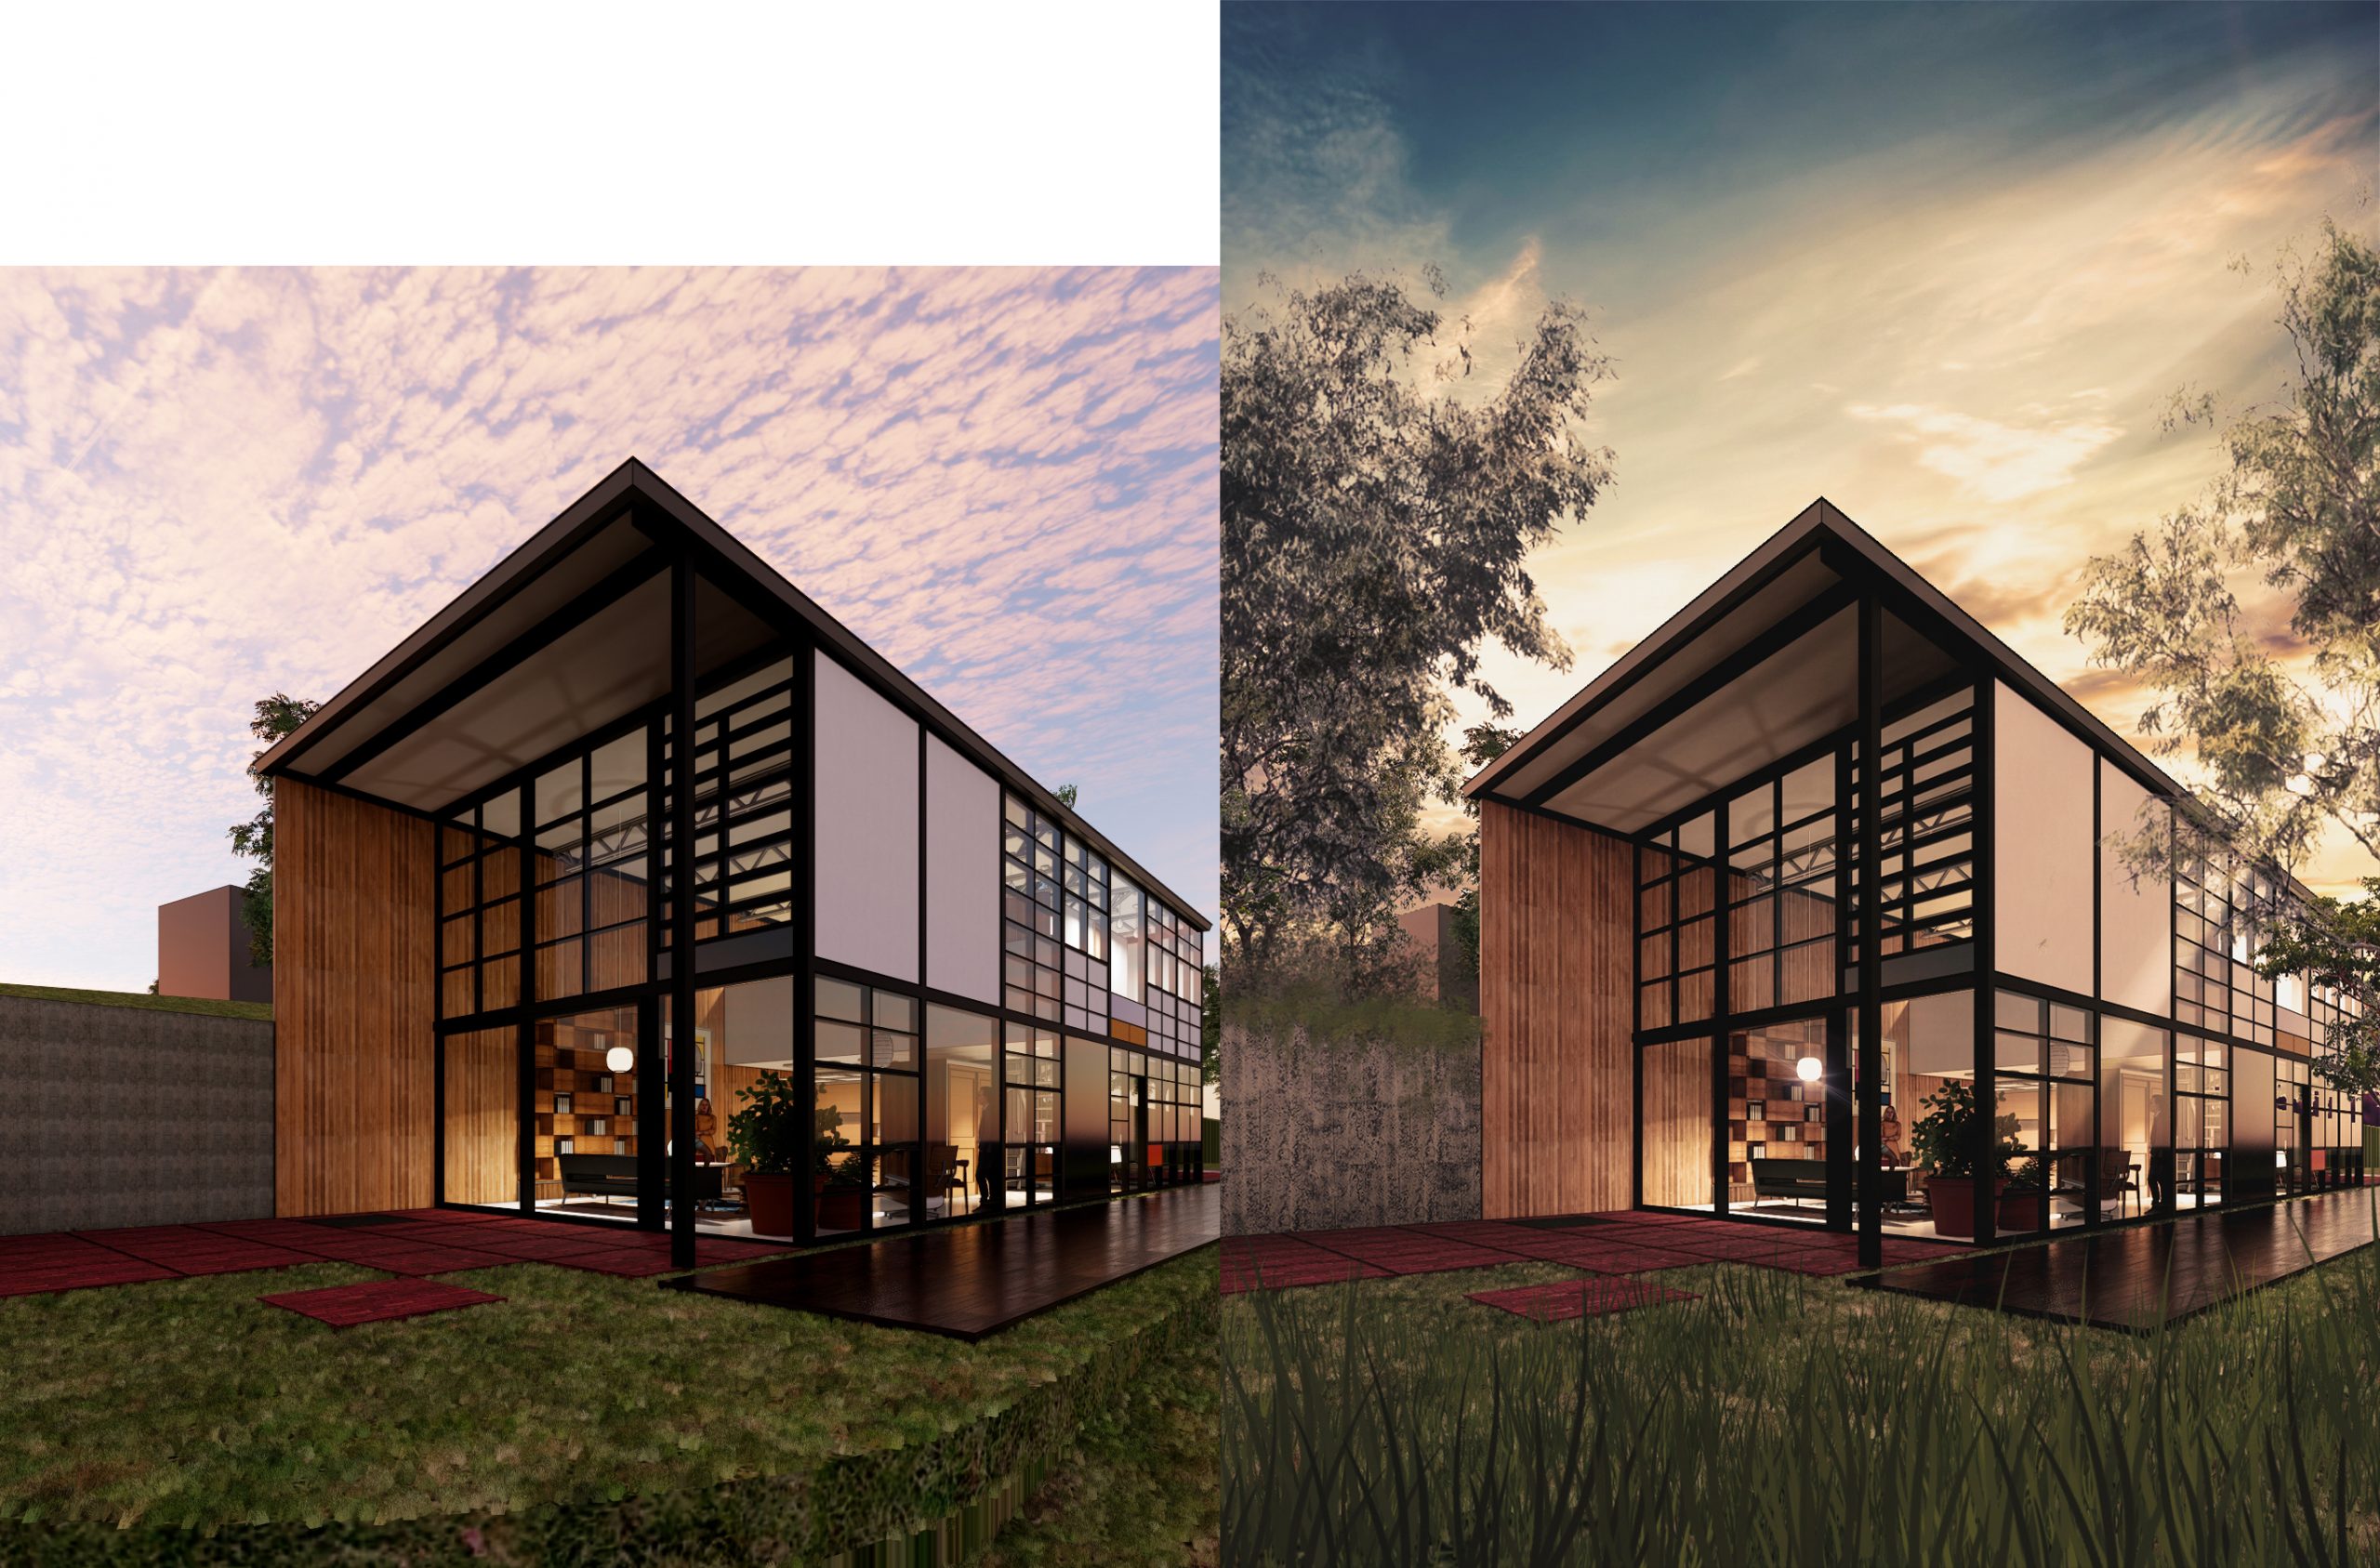 The two images compare the original rendering and the photoshopped rendering.